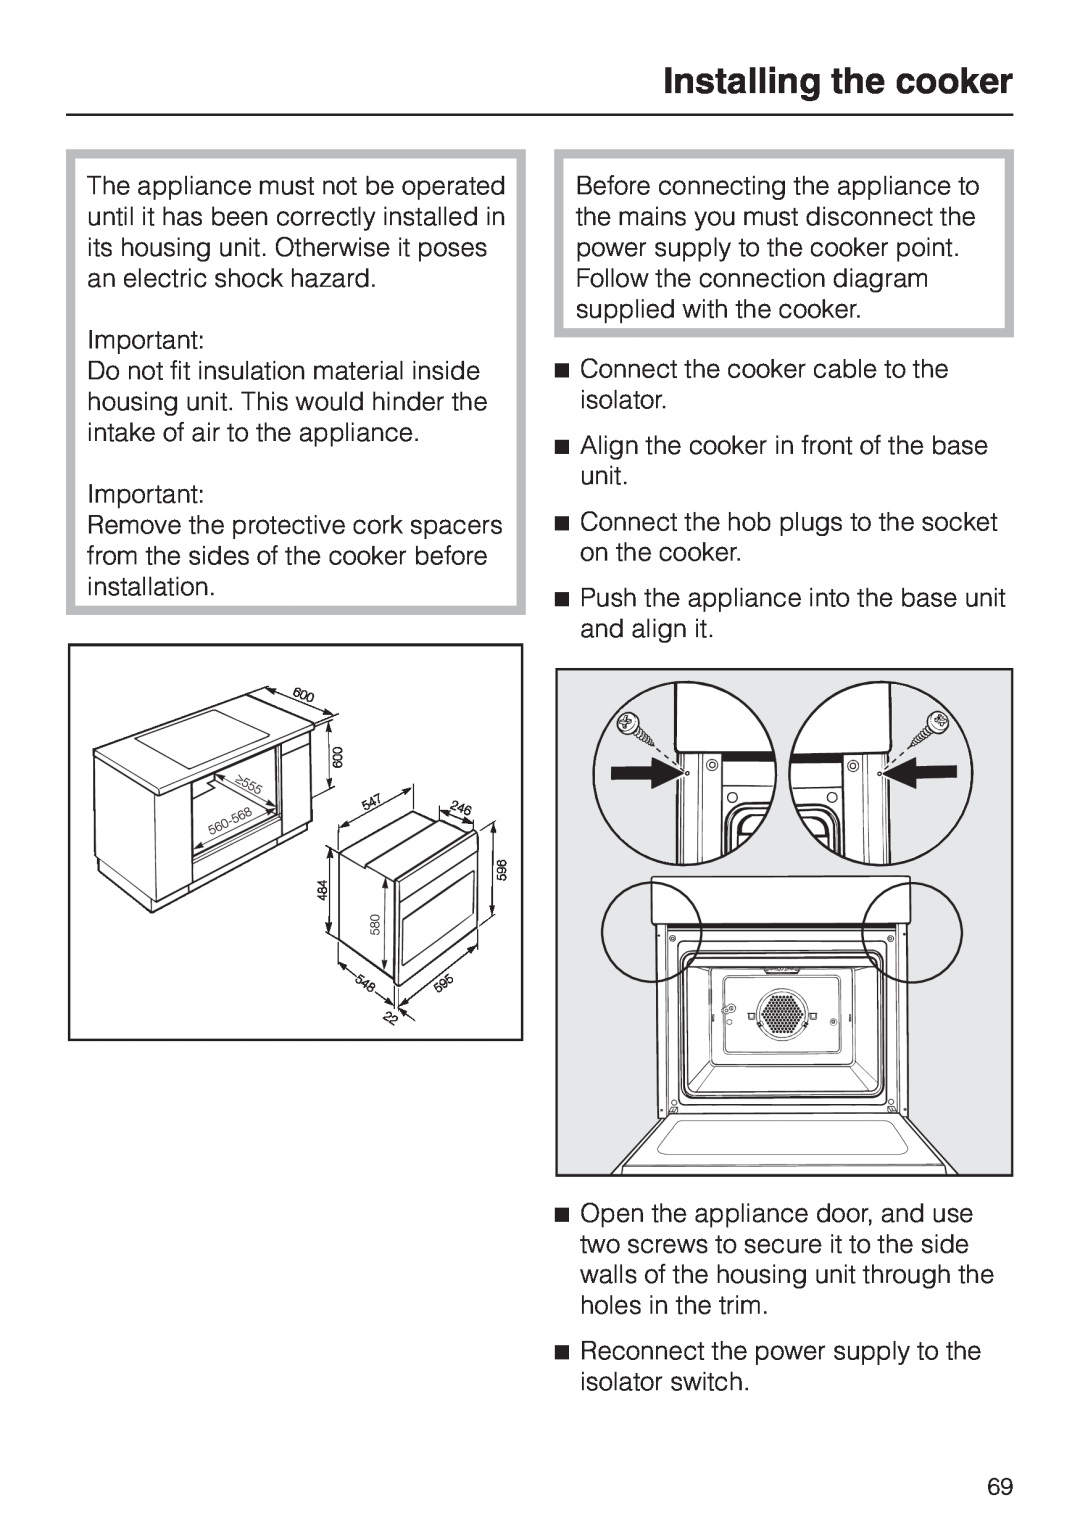 Miele H 4240, H 4150, H 4220, H 4130, H 4160, H 4120, H 4140, H 4260, H 4230, H 4250 installation instructions Installing the cooker 